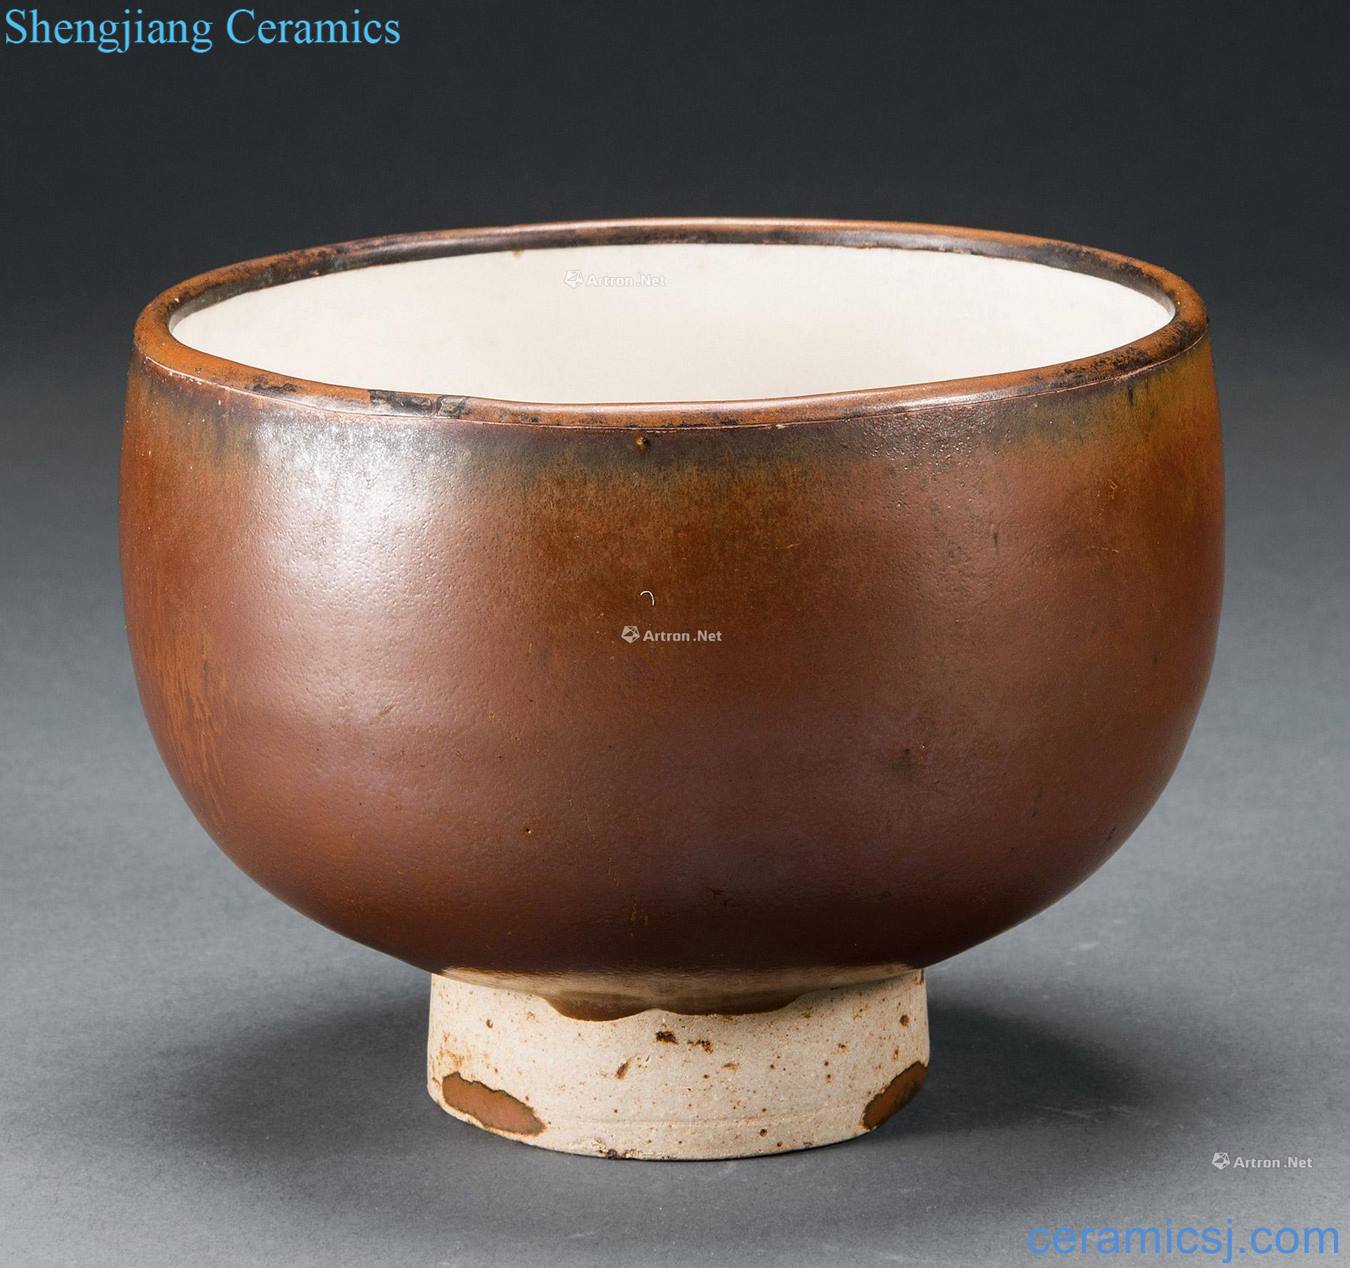 Song magnetic state kiln persimmon glaze bowls